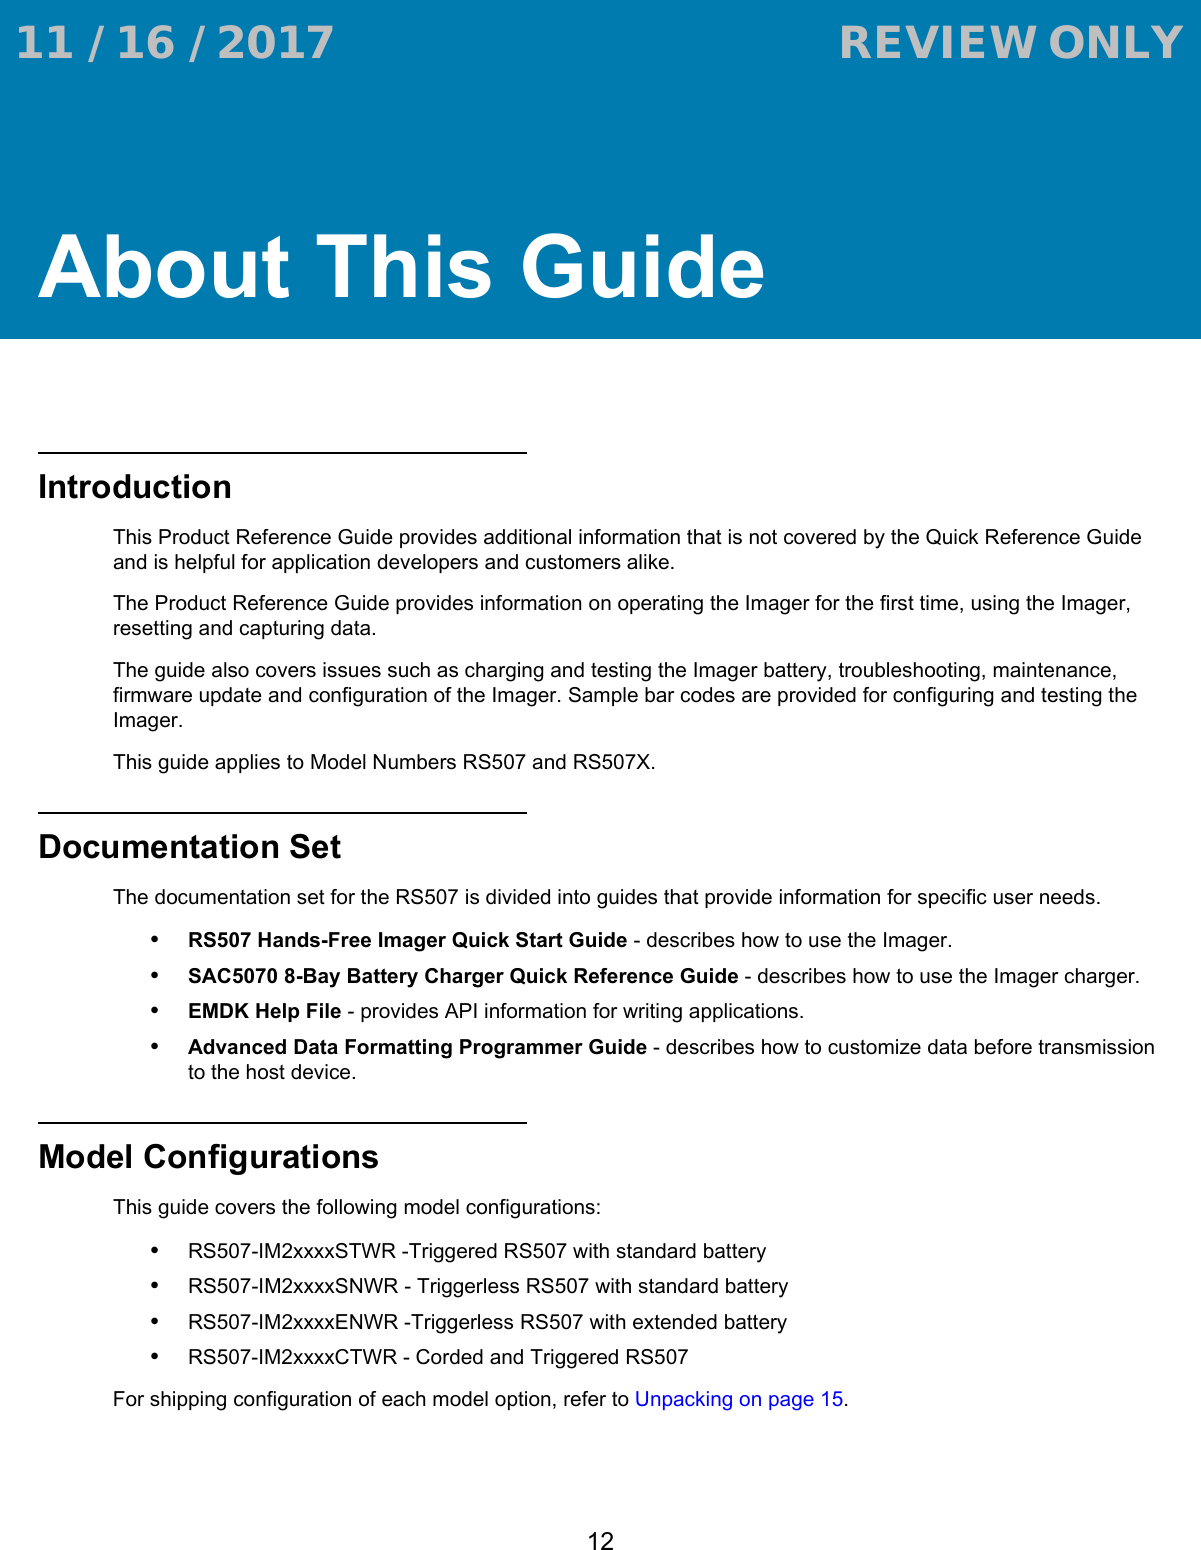 12About This GuideIntroductionThis Product Reference Guide provides additional information that is not covered by the Quick Reference Guide and is helpful for application developers and customers alike.The Product Reference Guide provides information on operating the Imager for the first time, using the Imager, resetting and capturing data.The guide also covers issues such as charging and testing the Imager battery, troubleshooting, maintenance, firmware update and configuration of the Imager. Sample bar codes are provided for configuring and testing the Imager.This guide applies to Model Numbers RS507 and RS507X.Documentation SetThe documentation set for the RS507 is divided into guides that provide information for specific user needs.•RS507 Hands-Free Imager Quick Start Guide - describes how to use the Imager.•SAC5070 8-Bay Battery Charger Quick Reference Guide - describes how to use the Imager charger.•EMDK Help File - provides API information for writing applications.•Advanced Data Formatting Programmer Guide - describes how to customize data before transmission to the host device.Model ConfigurationsThis guide covers the following model configurations:•RS507-IM2xxxxSTWR -Triggered RS507 with standard battery•RS507-IM2xxxxSNWR - Triggerless RS507 with standard battery•RS507-IM2xxxxENWR -Triggerless RS507 with extended battery•RS507-IM2xxxxCTWR - Corded and Triggered RS507For shipping configuration of each model option, refer to Unpacking on page 15. 11 / 16 / 2017                                  REVIEW ONLY                             REVIEW ONLY - REVIEW ONLY - REVIEW ONLY